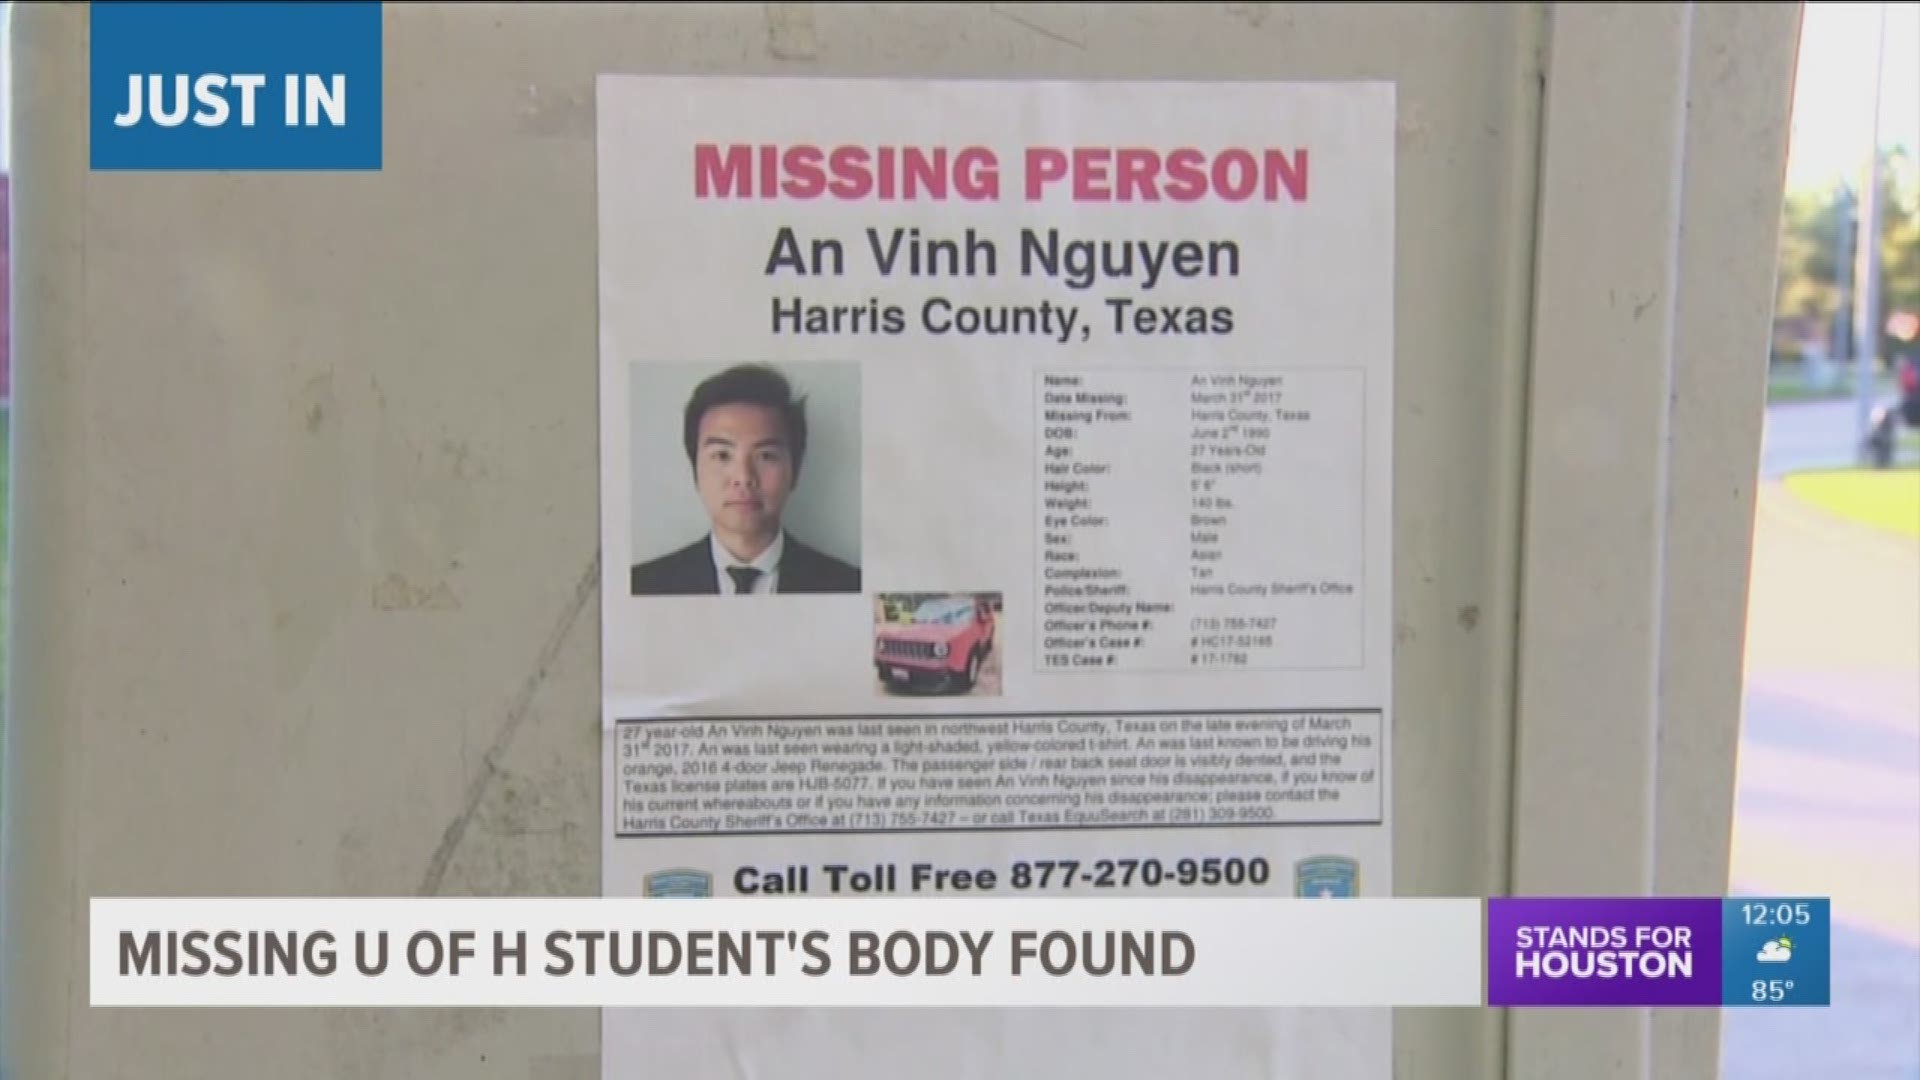 The body of the UH student who was first reported missing in April of 2017 has been found, according to the Harris County Medical Examiner.